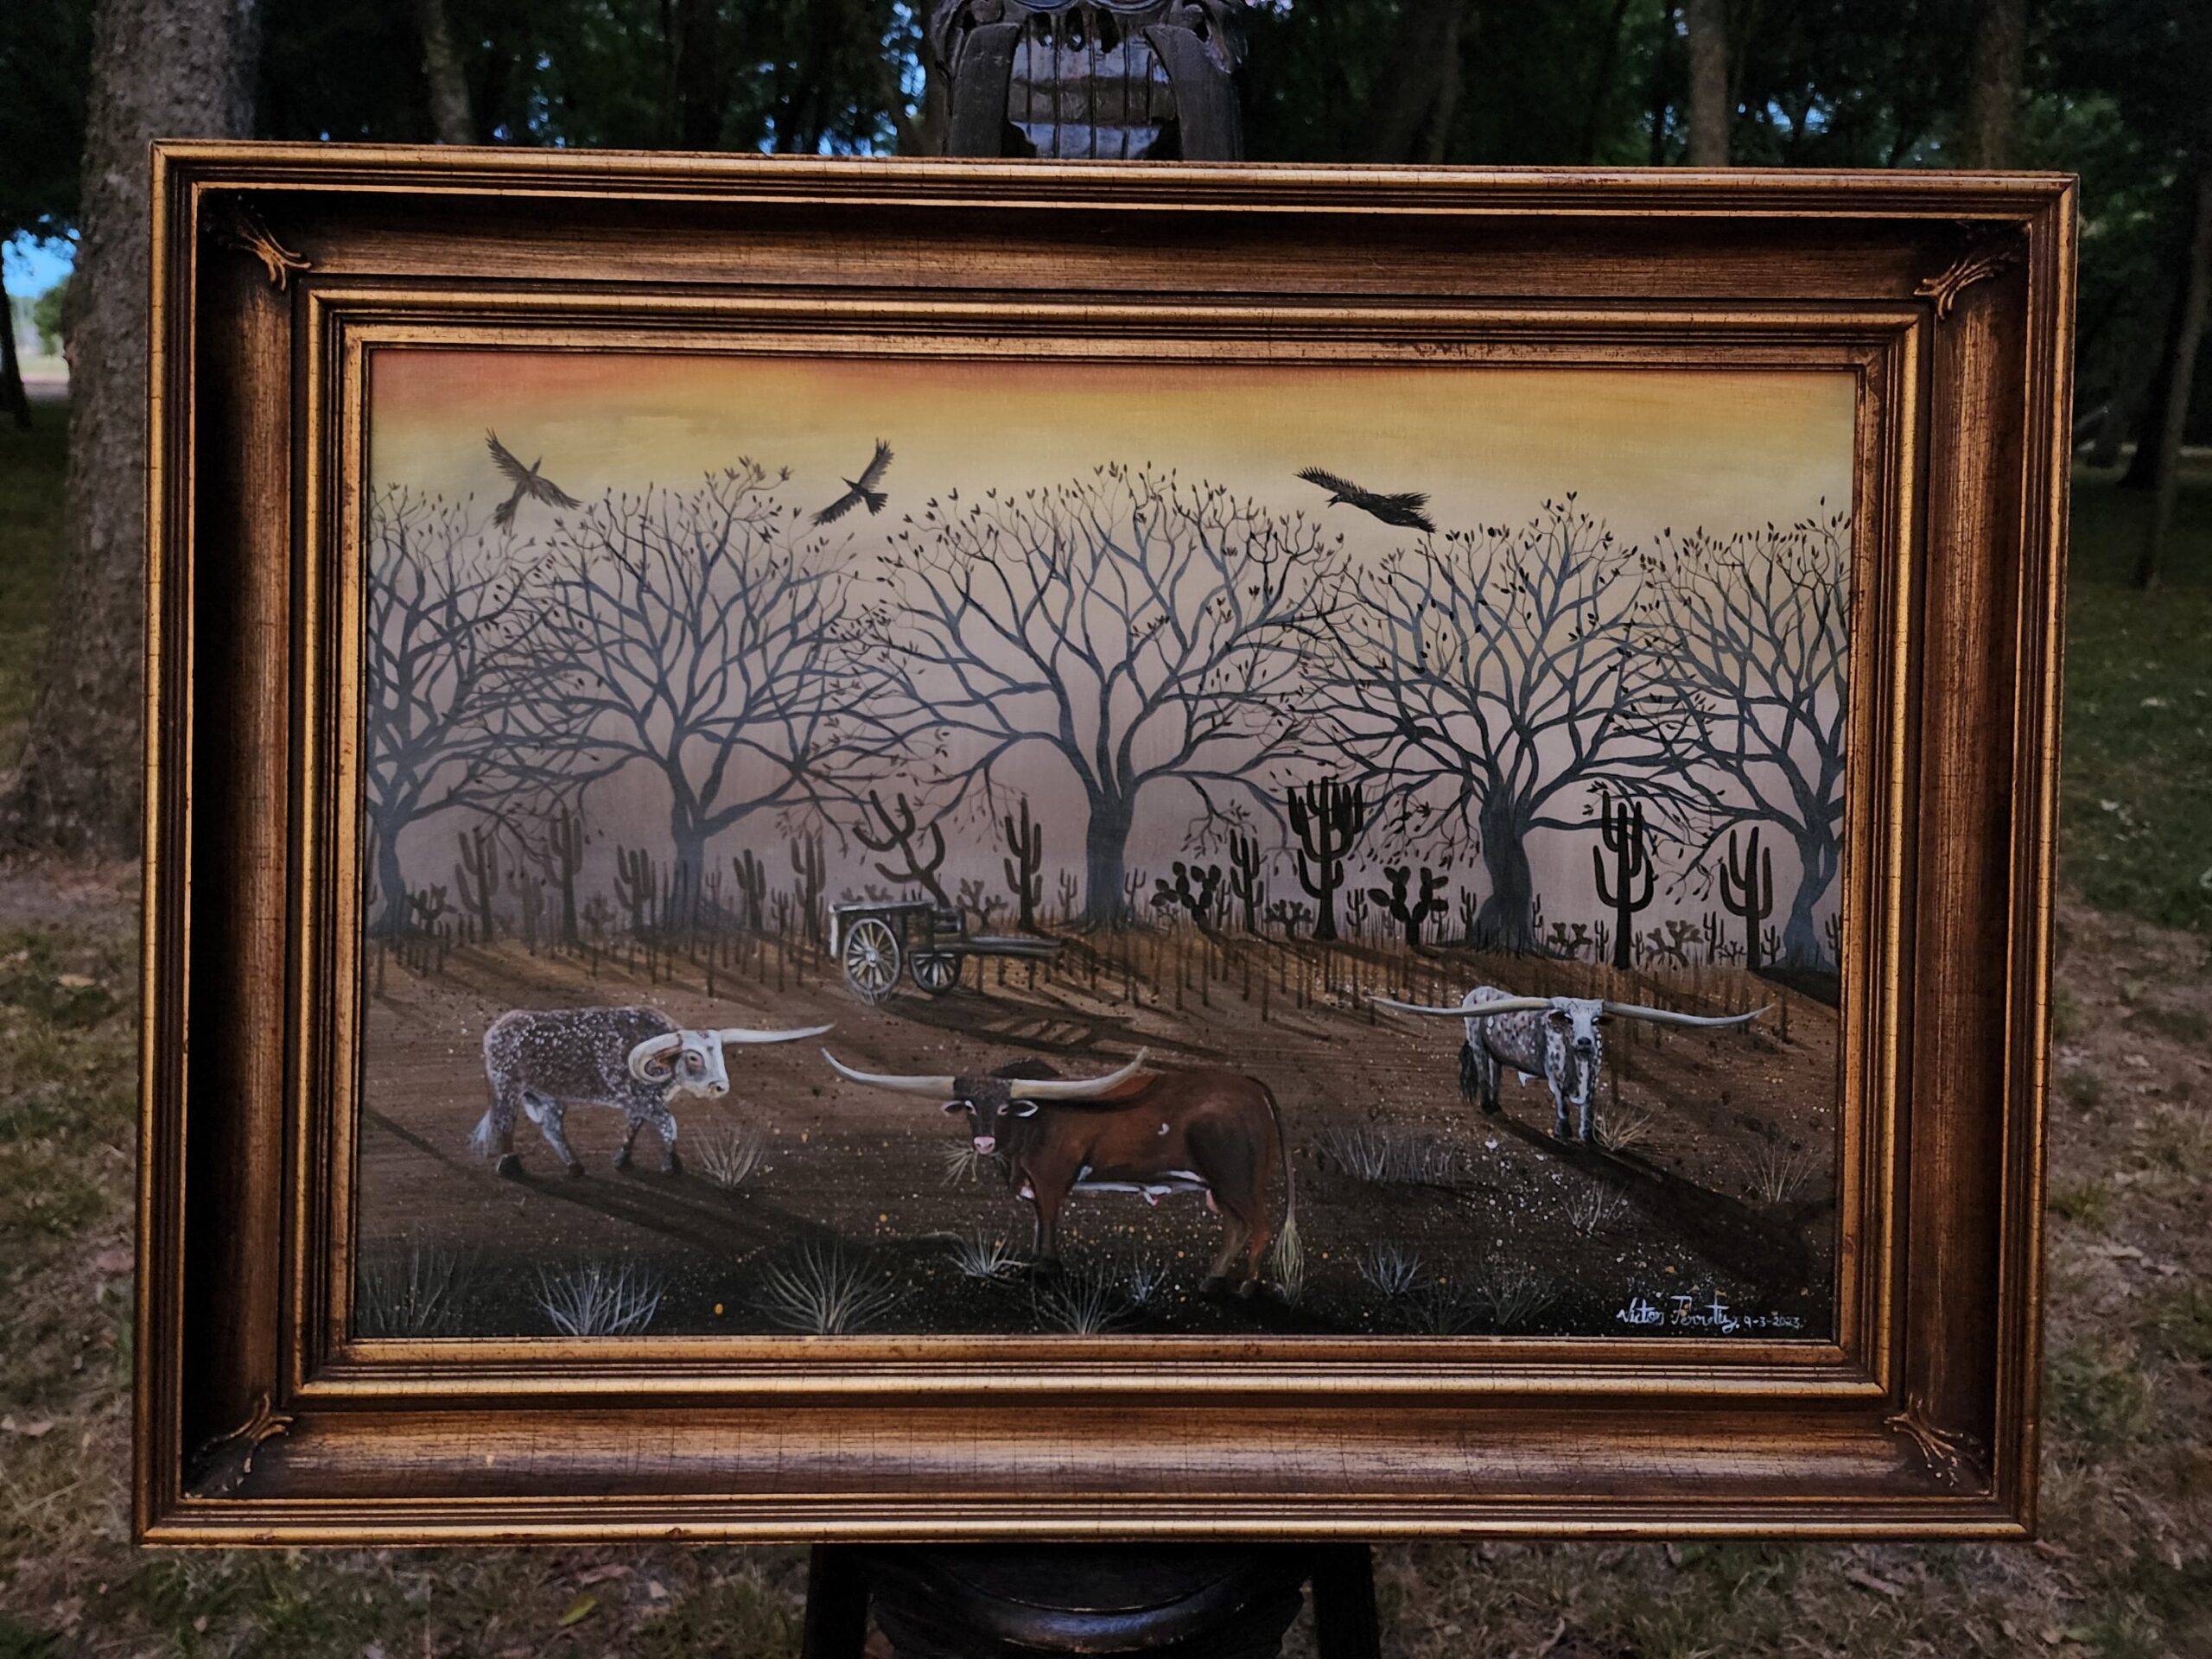 Original painting of Texas Longhorn bulls in a fall season scene. This painting was inspired in the Texas landscapes in the autumn. The depiction of cacti and tall oak trees make the painting come alive with the vibes west Texas.